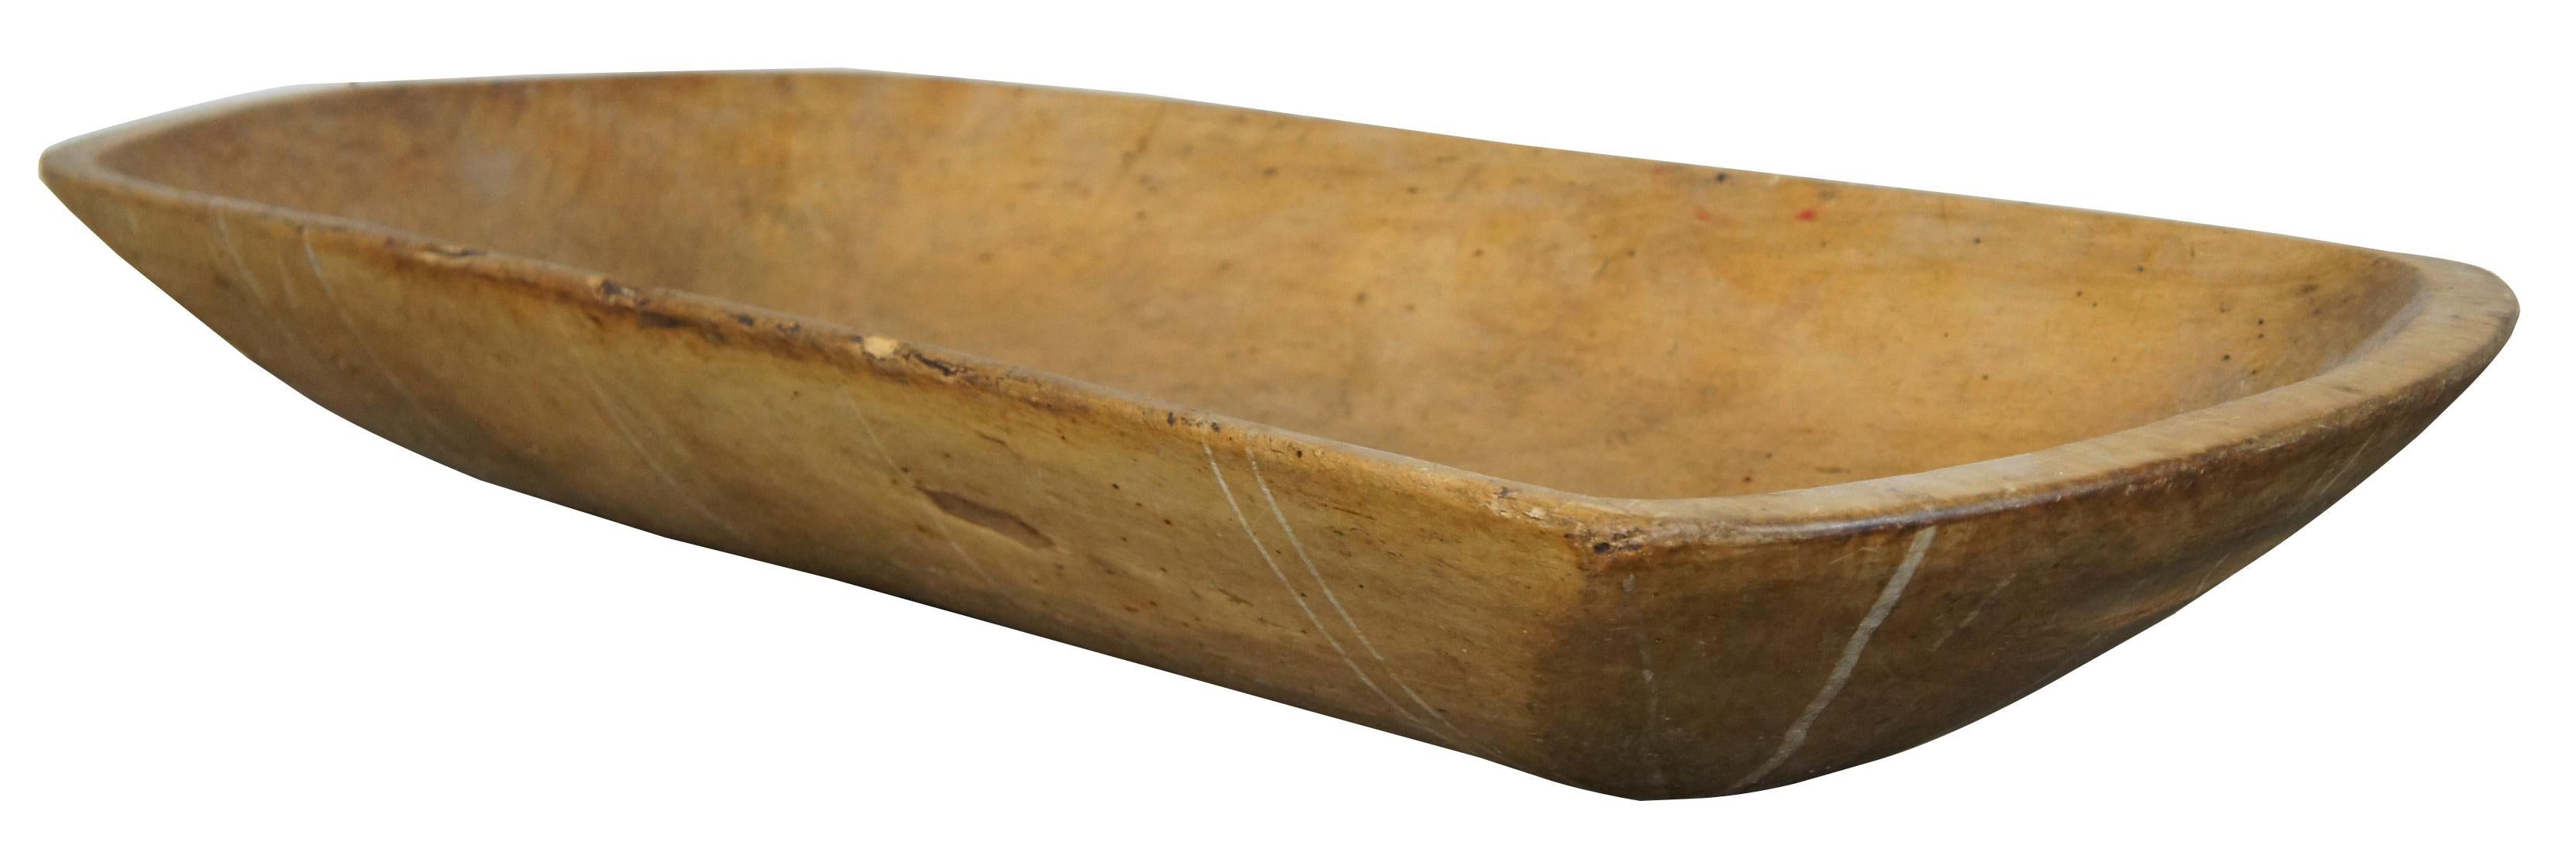 Primitive hand hewn pine dough bowl or trencher.
 